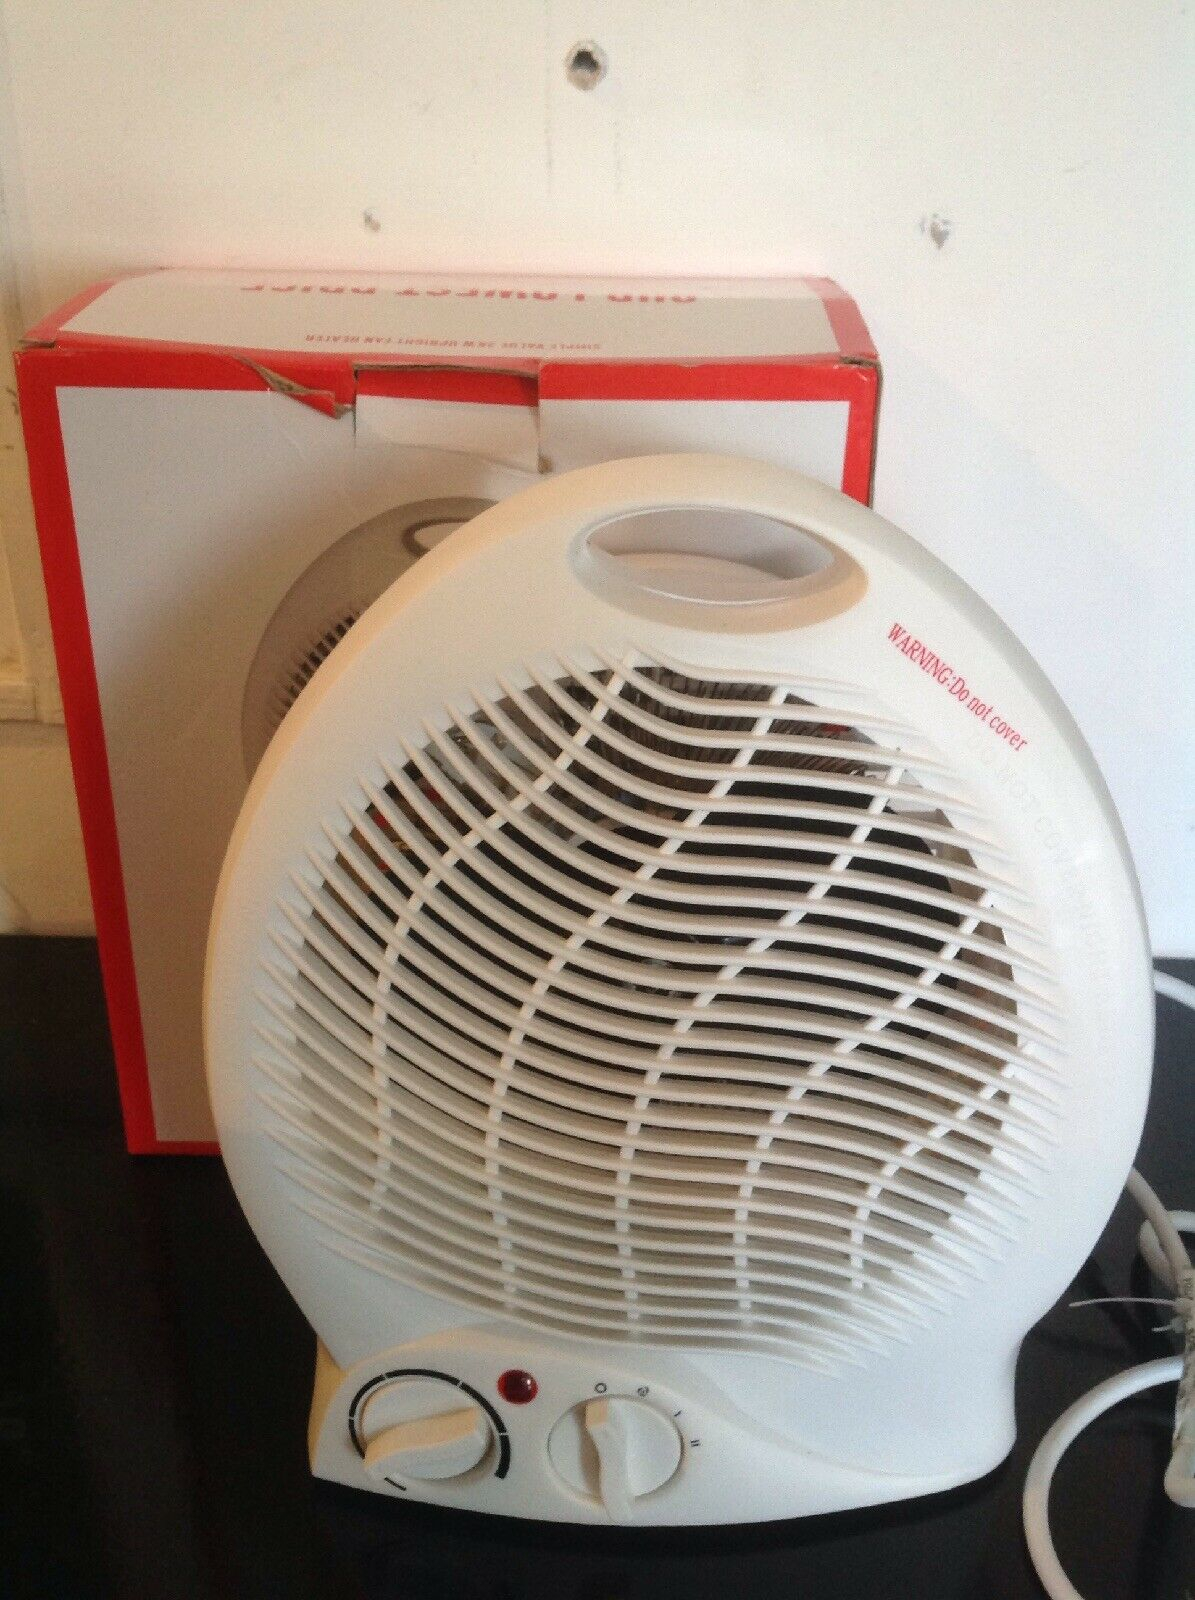 Argos Simple Value 2kw Upright Fan Heater Fully Working With Box pertaining to dimensions 1195 X 1600